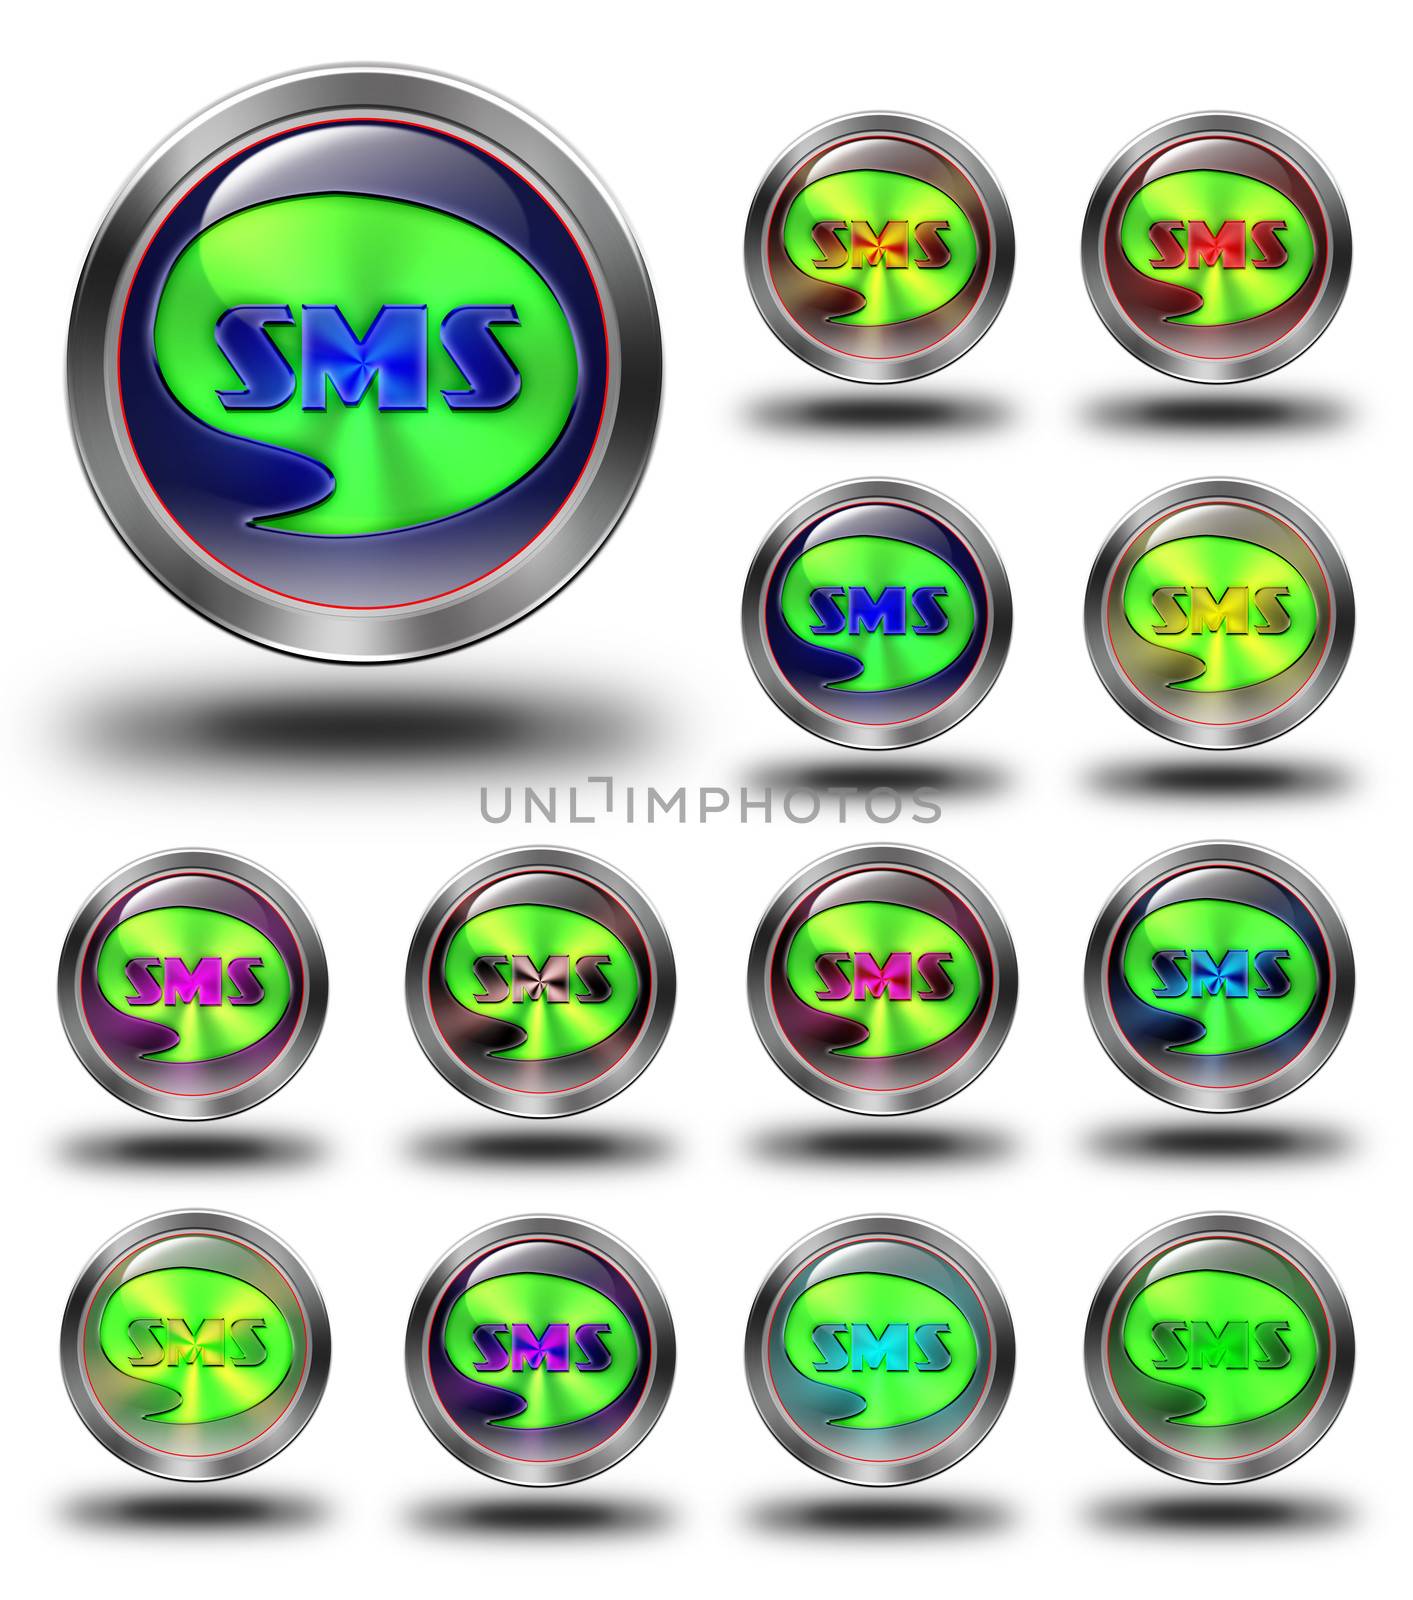 aluminum, steel, chromium, glossy, icon, button, sign, icons, buttons, crazy colors